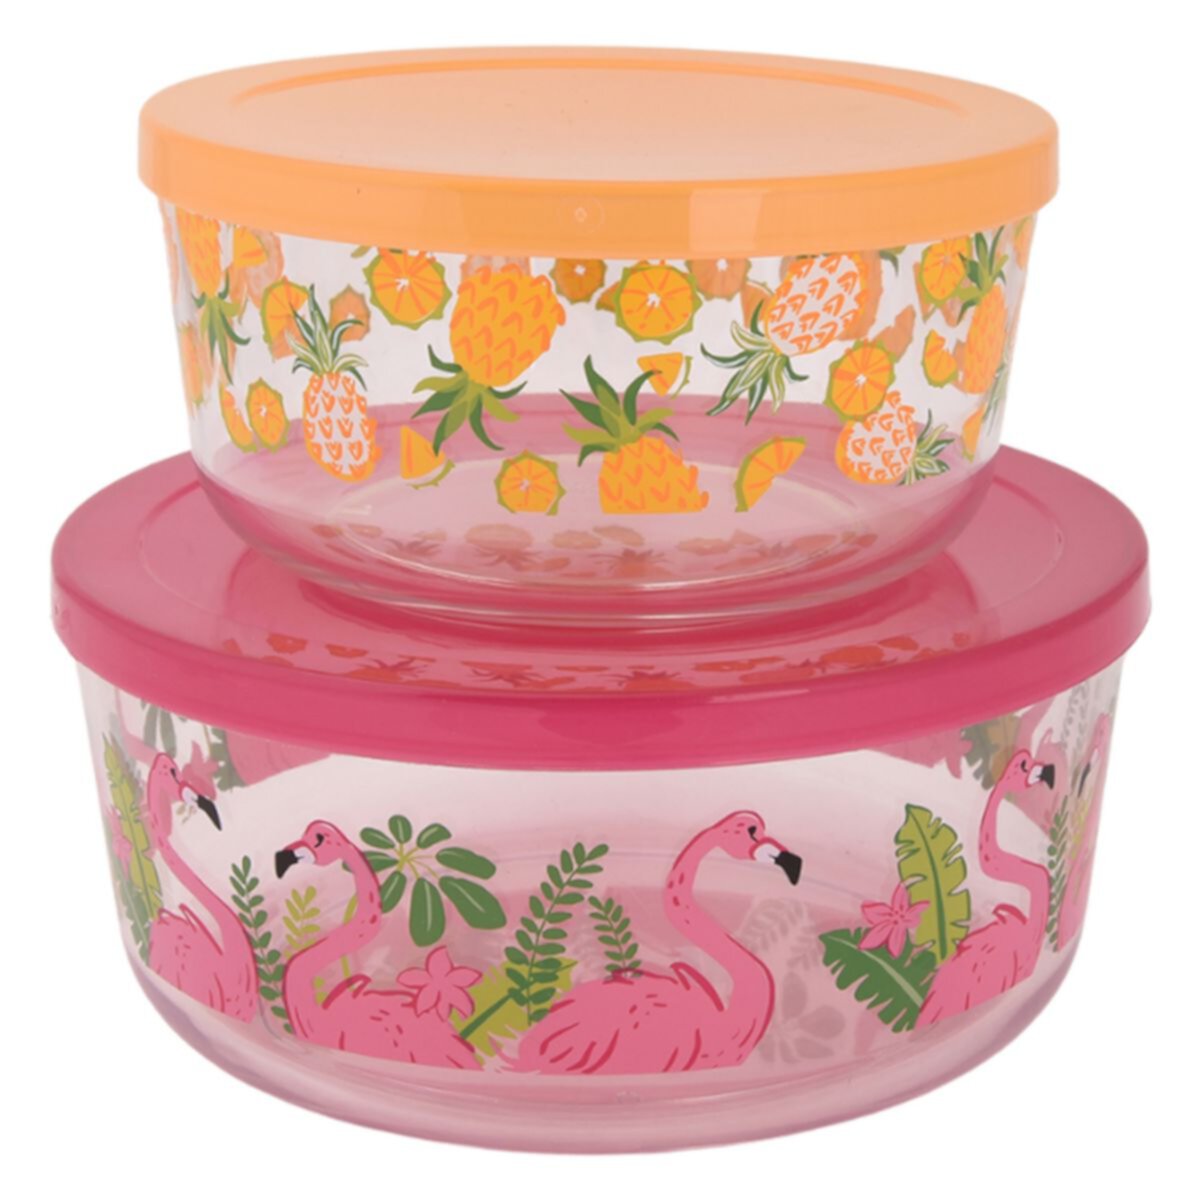 Celebrate Together Summer Flamingo & Fruit Stacking Food Storage Containers Celebrate Together